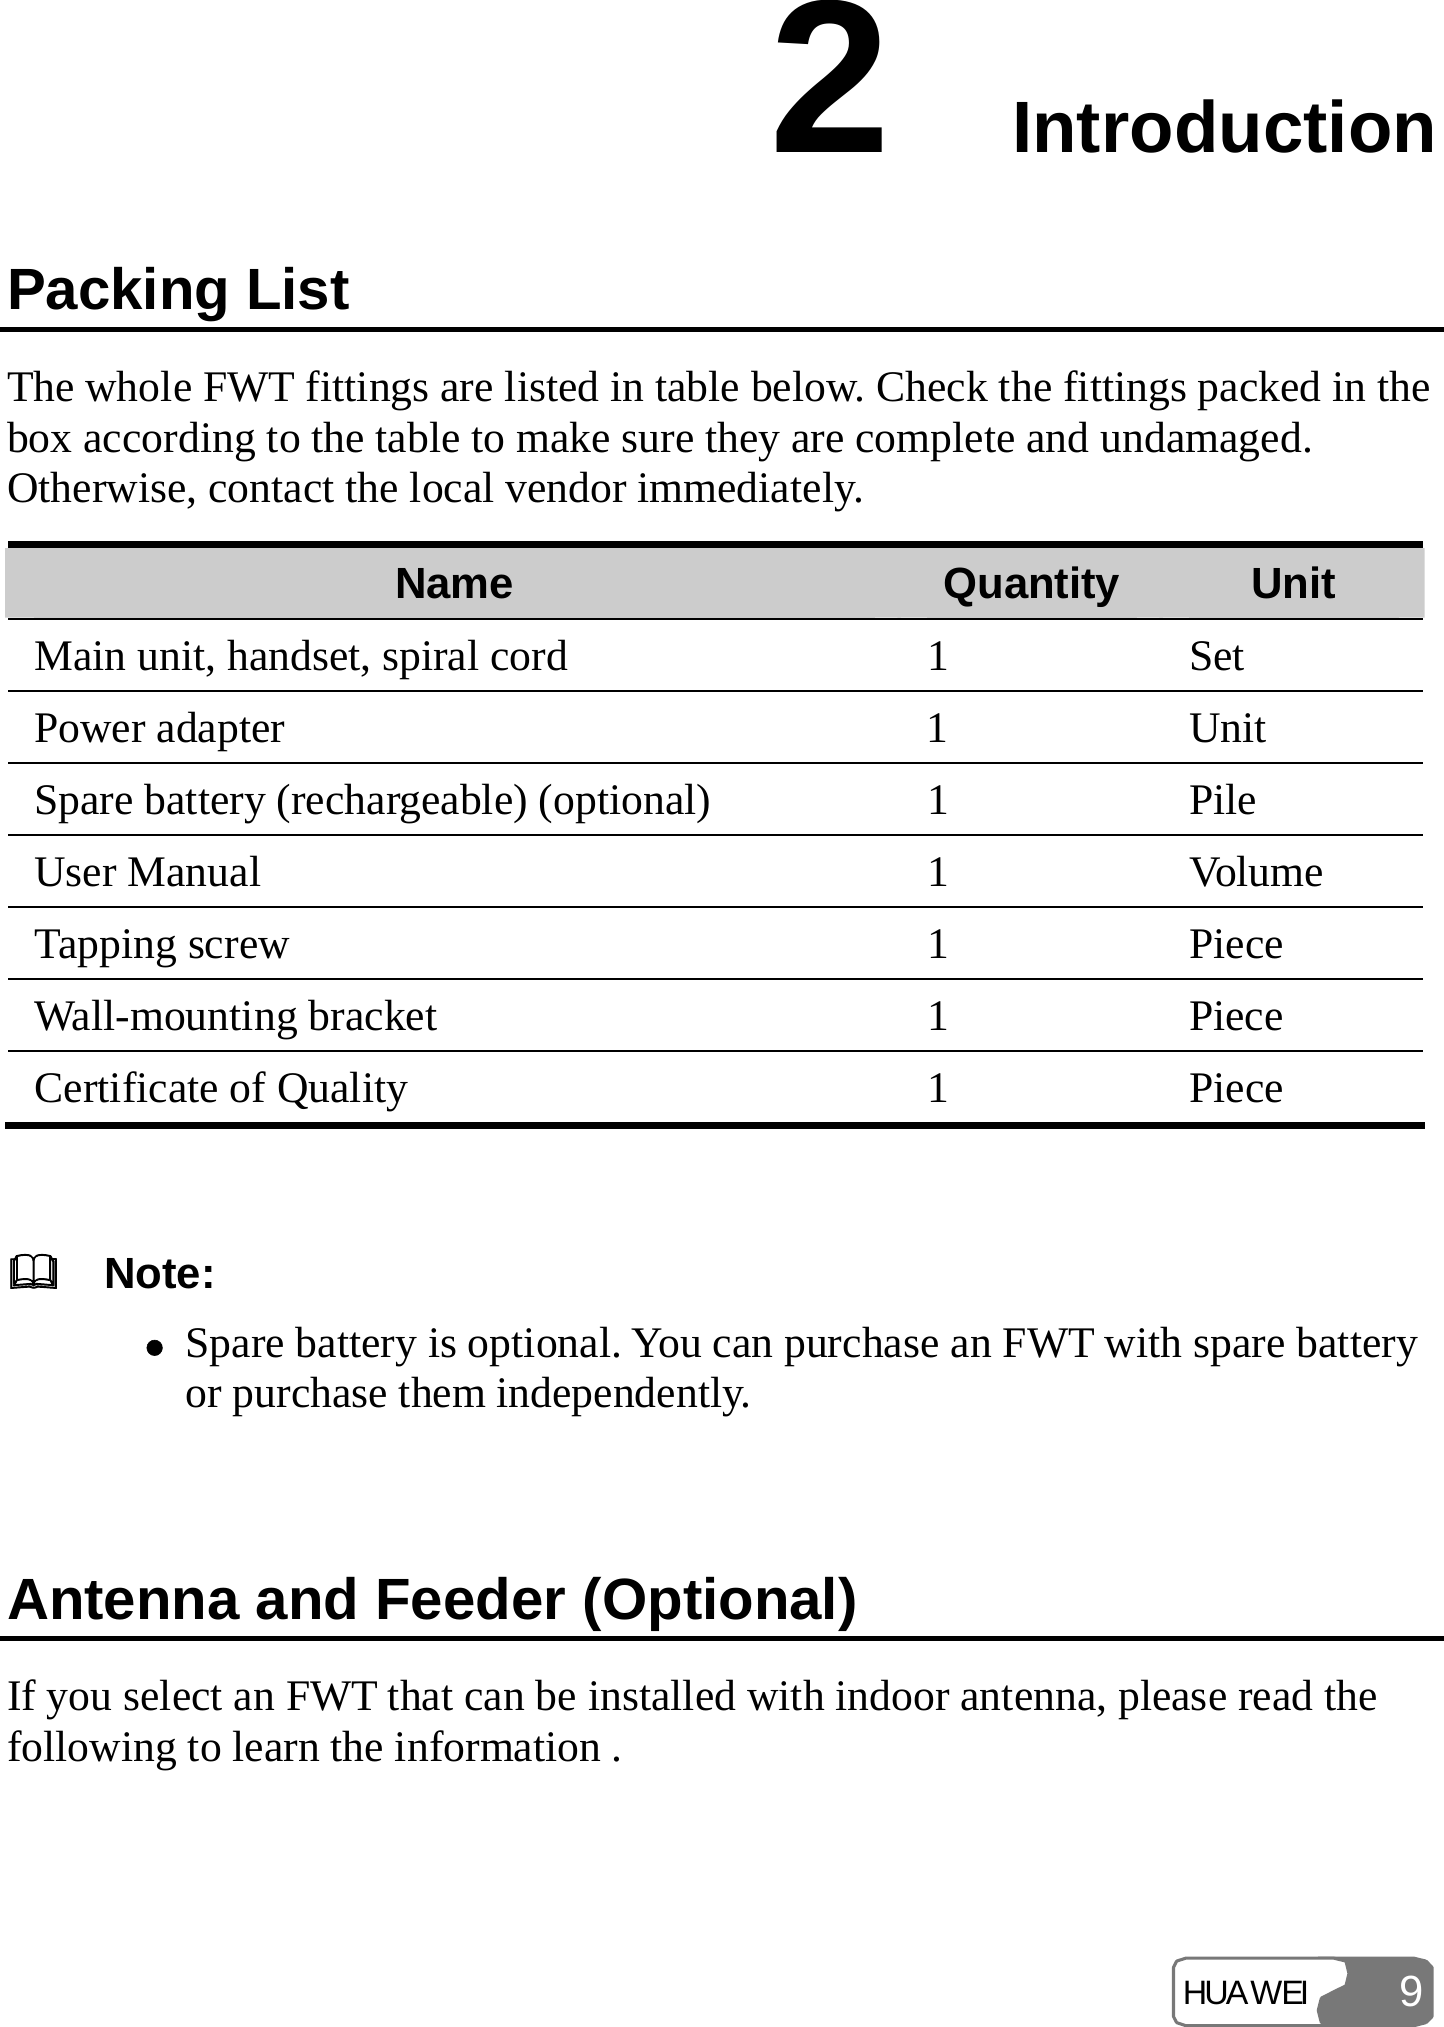 HUAWEI 92  Introduction Packing List The whole FWT fittings are listed in table below. Check the fittings packed in the box according to the table to make sure they are complete and undamaged. Otherwise, contact the local vendor immediately. Name  Quantity Unit Main unit, handset, spiral cord  1  Set Power adapter  1  Unit Spare battery (rechargeable) (optional)  1  Pile User Manual  1  Volume Tapping screw  1  Piece Wall-mounting bracket  1  Piece Certificate of Quality  1  Piece    Note: z Spare battery is optional. You can purchase an FWT with spare battery or purchase them independently.  Antenna and Feeder (Optional) If you select an FWT that can be installed with indoor antenna, please read the following to learn the information . 